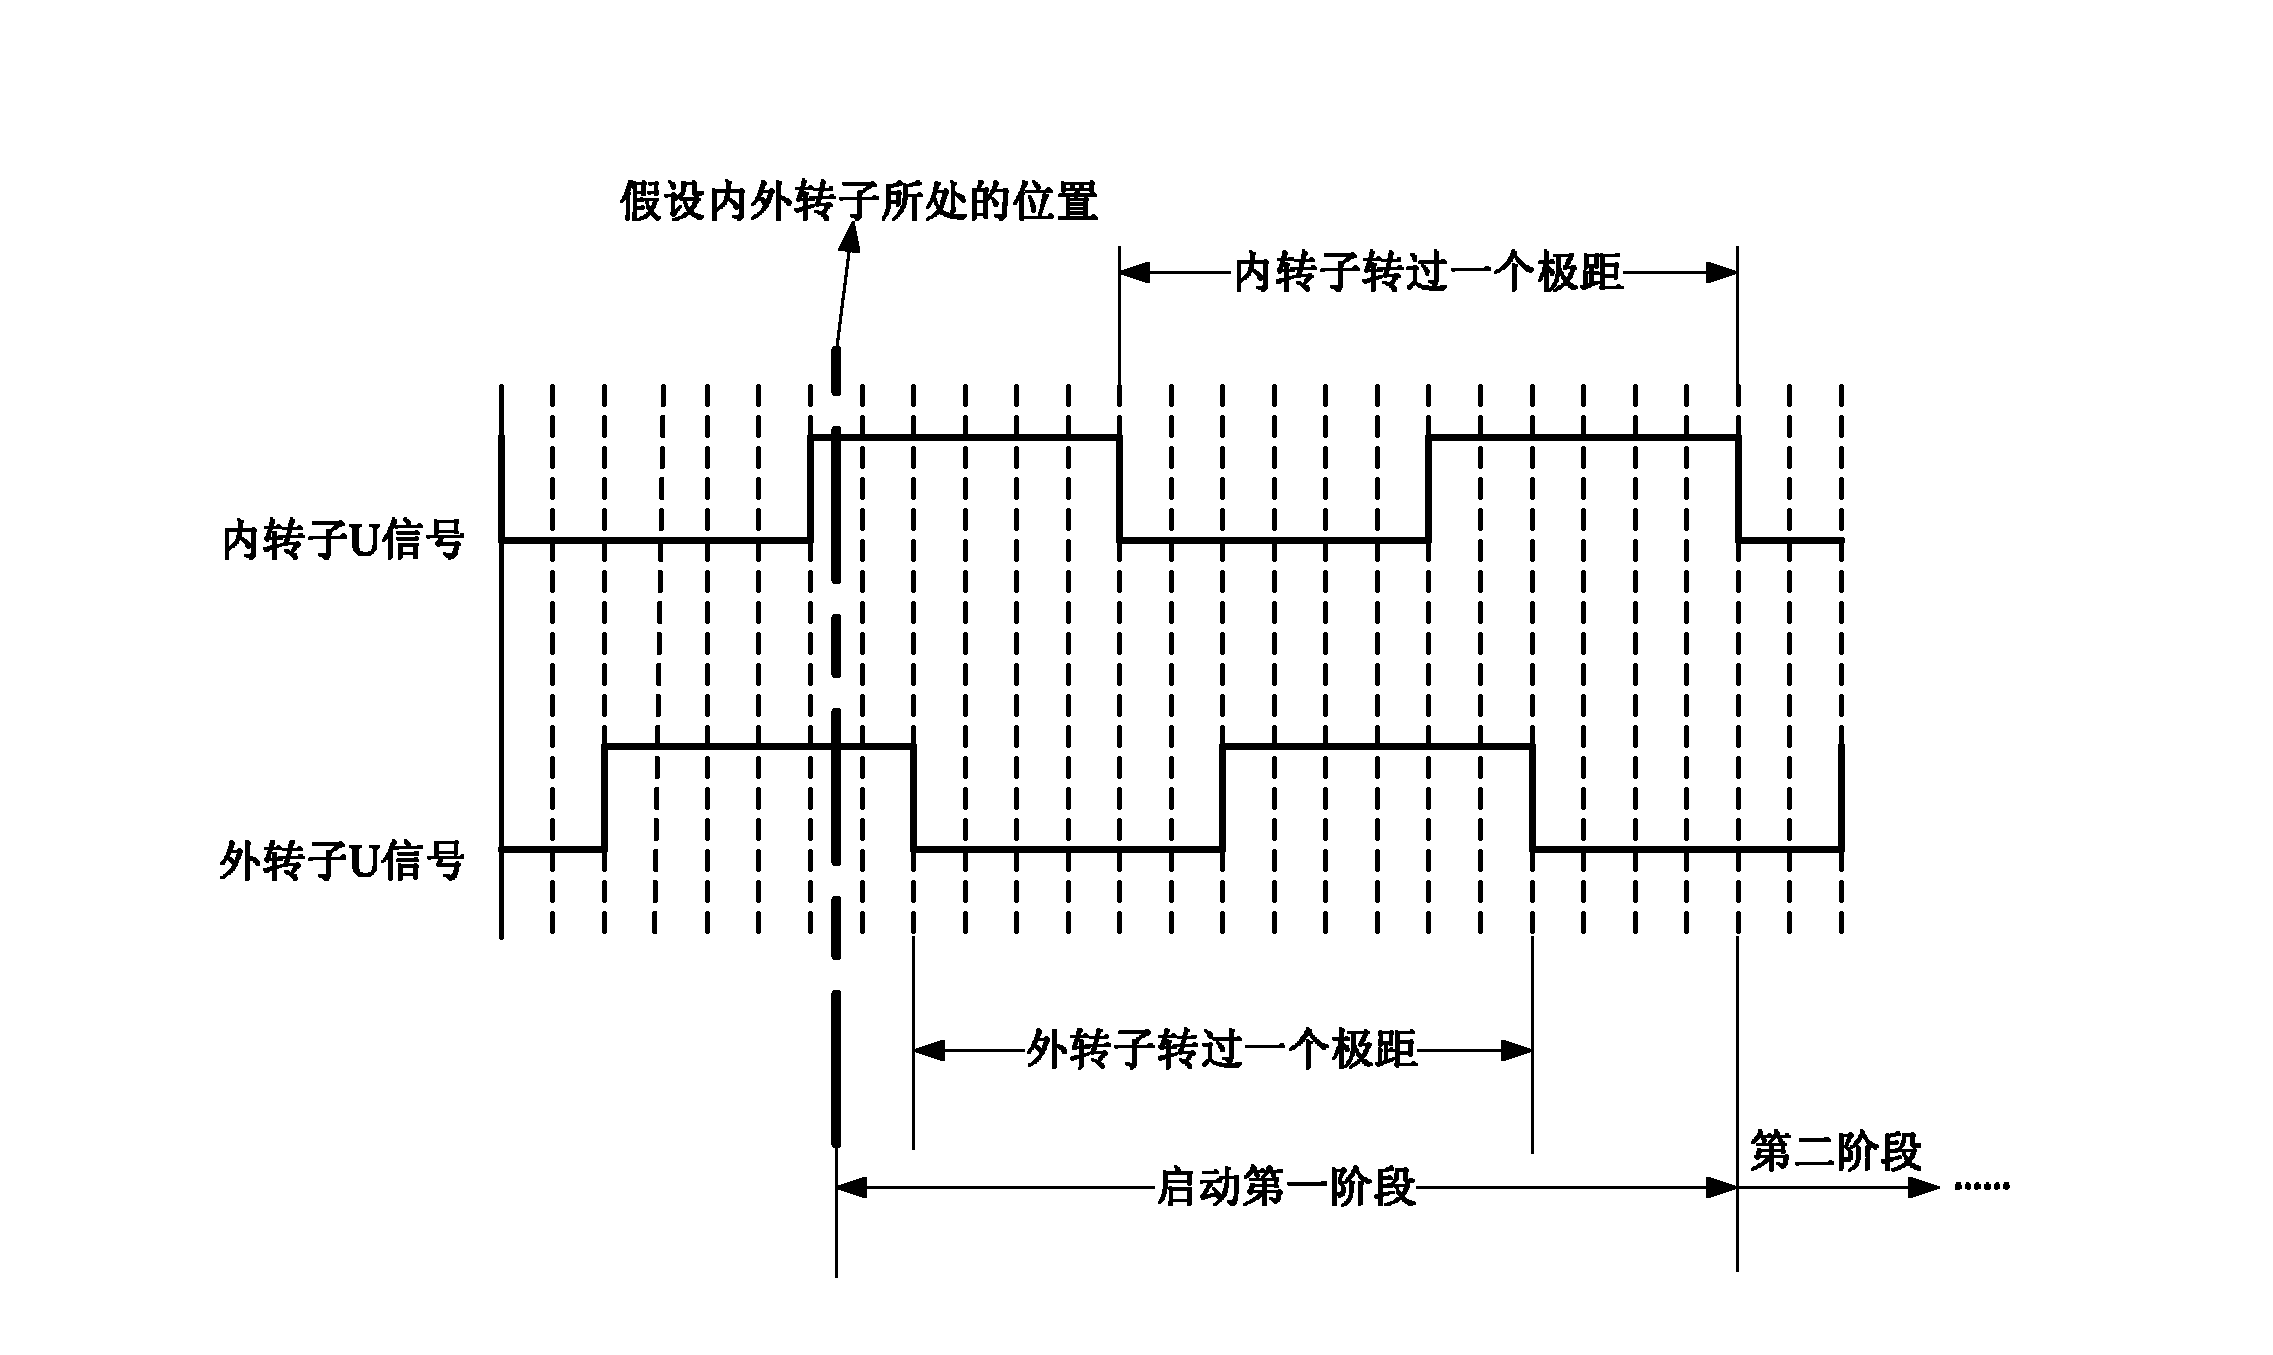 Initial starting method for double-shaft contra-rotating permanent magnet brushless direct current motor